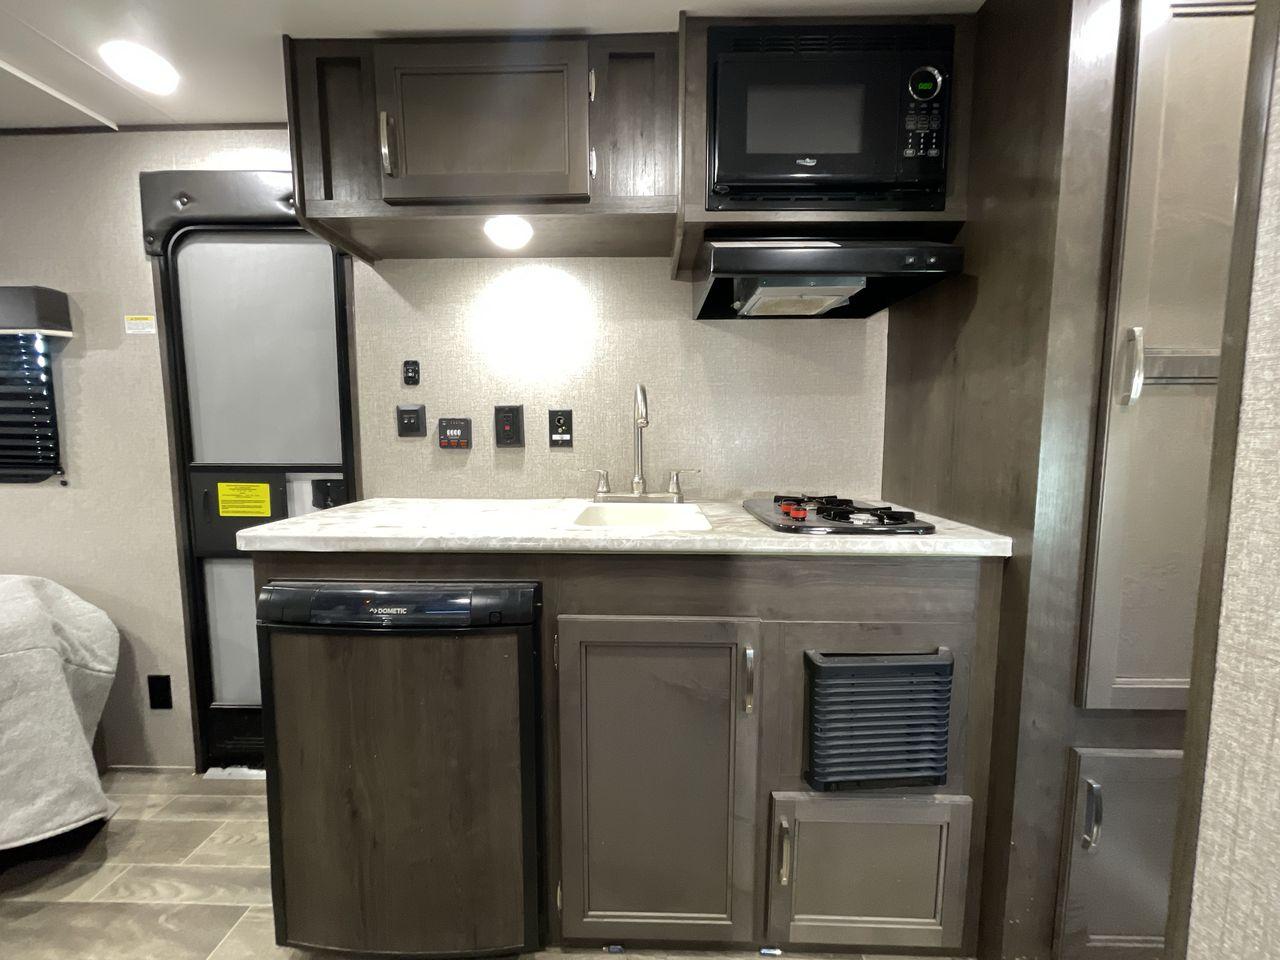 2021 JAYCO JAY FLIGHT SLX 174BH (1UJBJ0AJ1M1) , Length: 21.67 ft | Dry Weight: 3,075 lbs | GVWR: 3,950 lbs | Slides: 0 transmission, located at 4319 N Main Street, Cleburne, TX, 76033, (817) 221-0660, 32.435829, -97.384178 - Take the 2021 Jayco Jay Flight SLX 174BH travel trailer out on your camping adventures. This lightweight and small RV is ideal for people looking for an affordable and cozy way to enjoy the great outdoors. The dimensions of this unit are 21.67 ft in length, 7.08 ft in width, and 9.17 ft in height. I - Photo #10